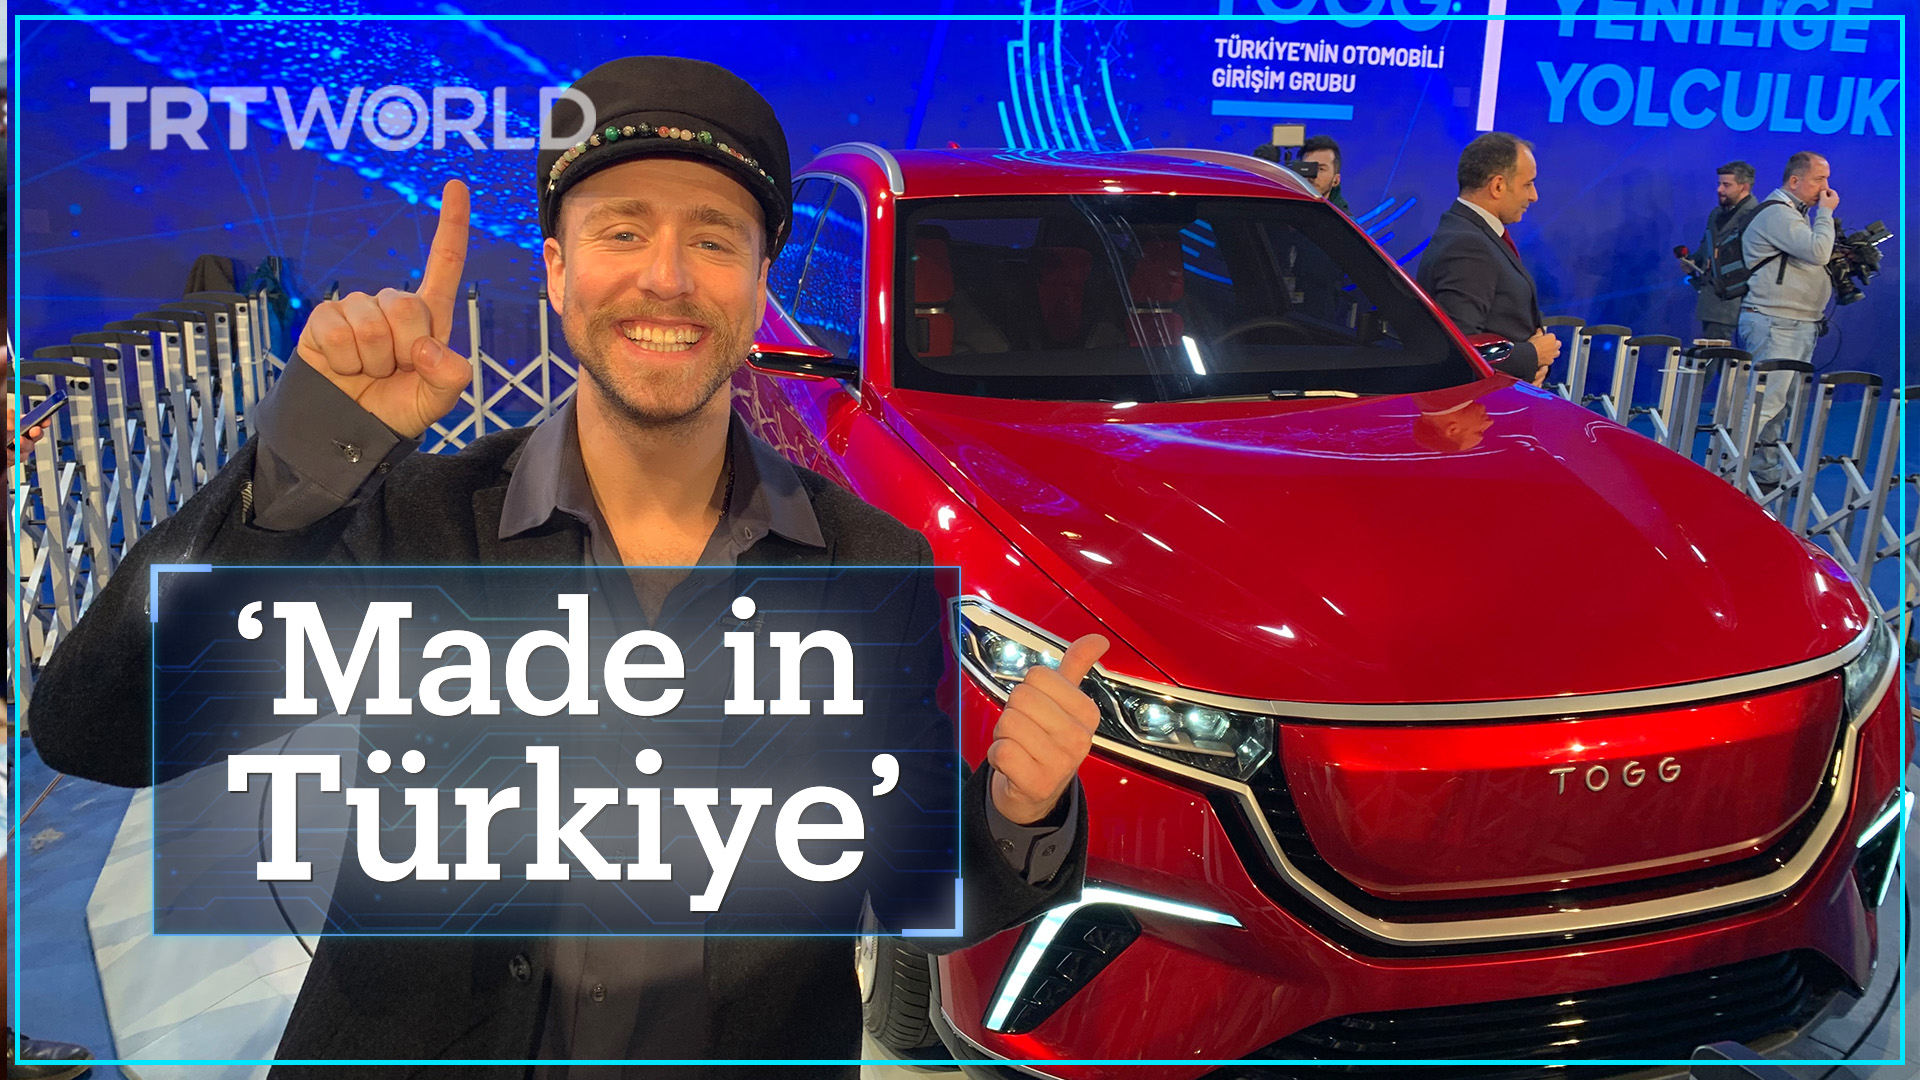 TRT World on Twitter: "TOGG has introduced two models of Turkey's first domestically developed electric car. We head to the ceremony to see the big unveiling https://t.co/Oy3rGBxUaz" / Twitter